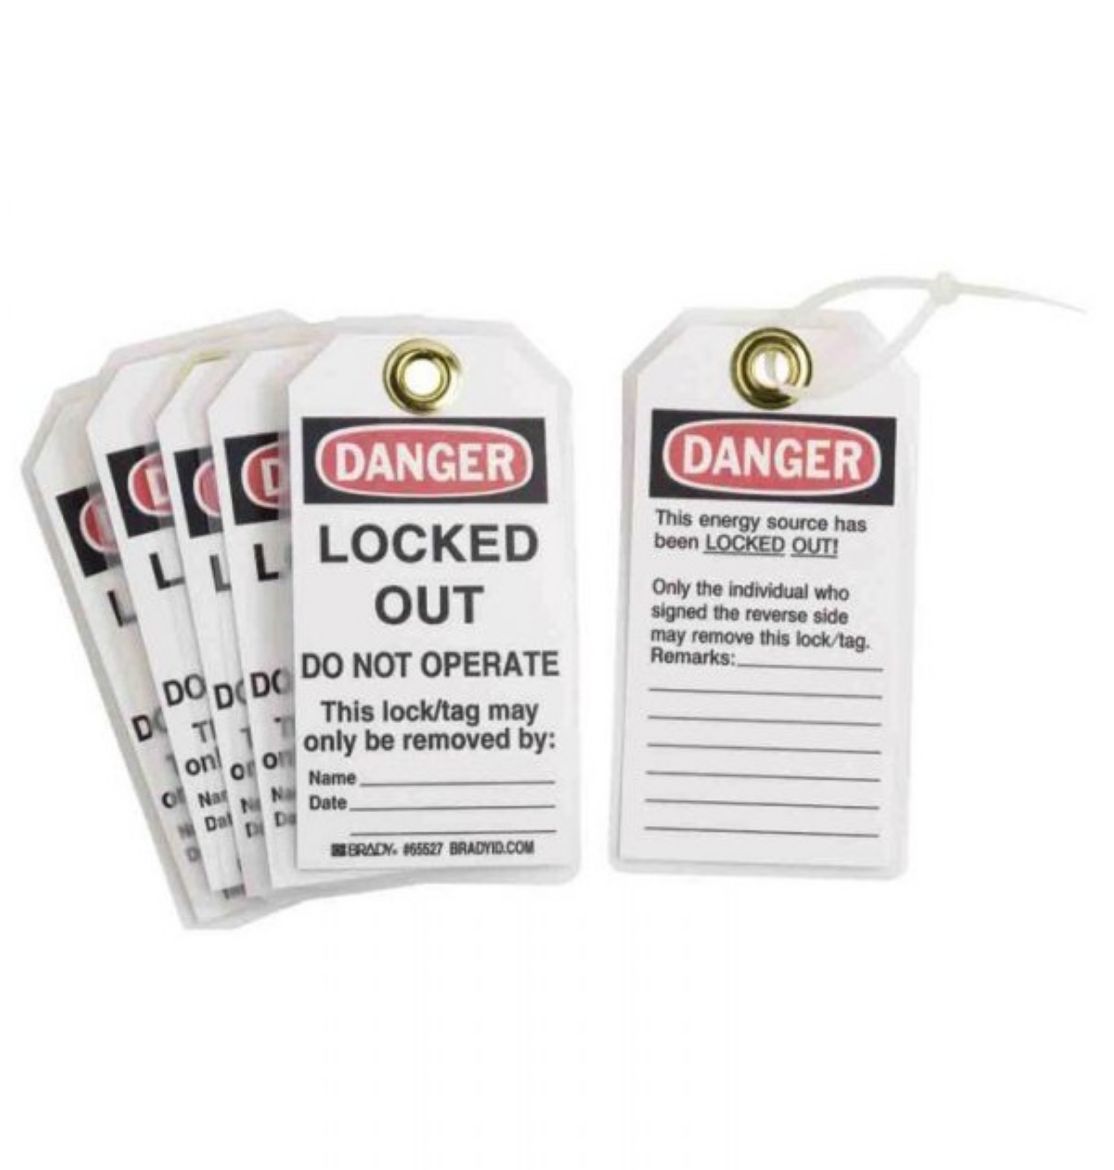 Picture of DANGER LOCKED OUT LOCKOUT TAGS - REVERSE SIDE ONLY THE INDIVIDUAL WHO, POLYESTER